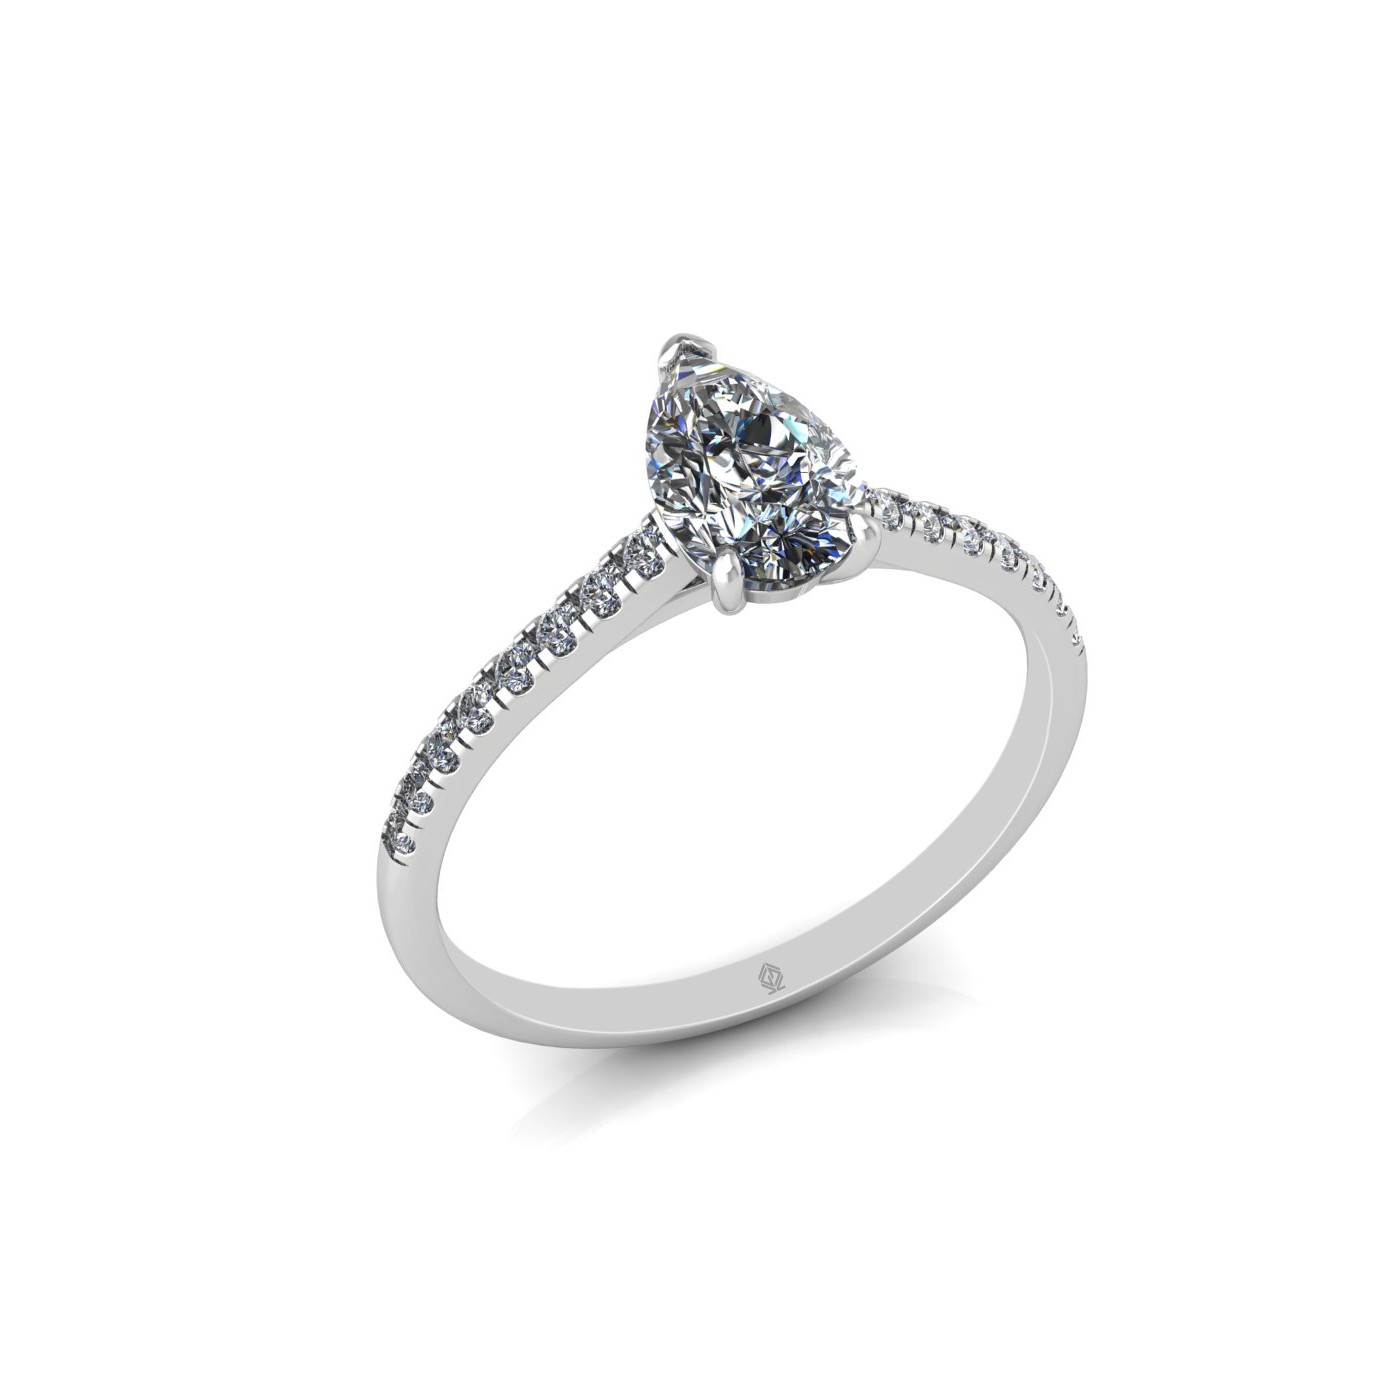 18k white gold 0,80 ct 3 prongs pear diamond engagement ring with whisper thin pavÉ set band